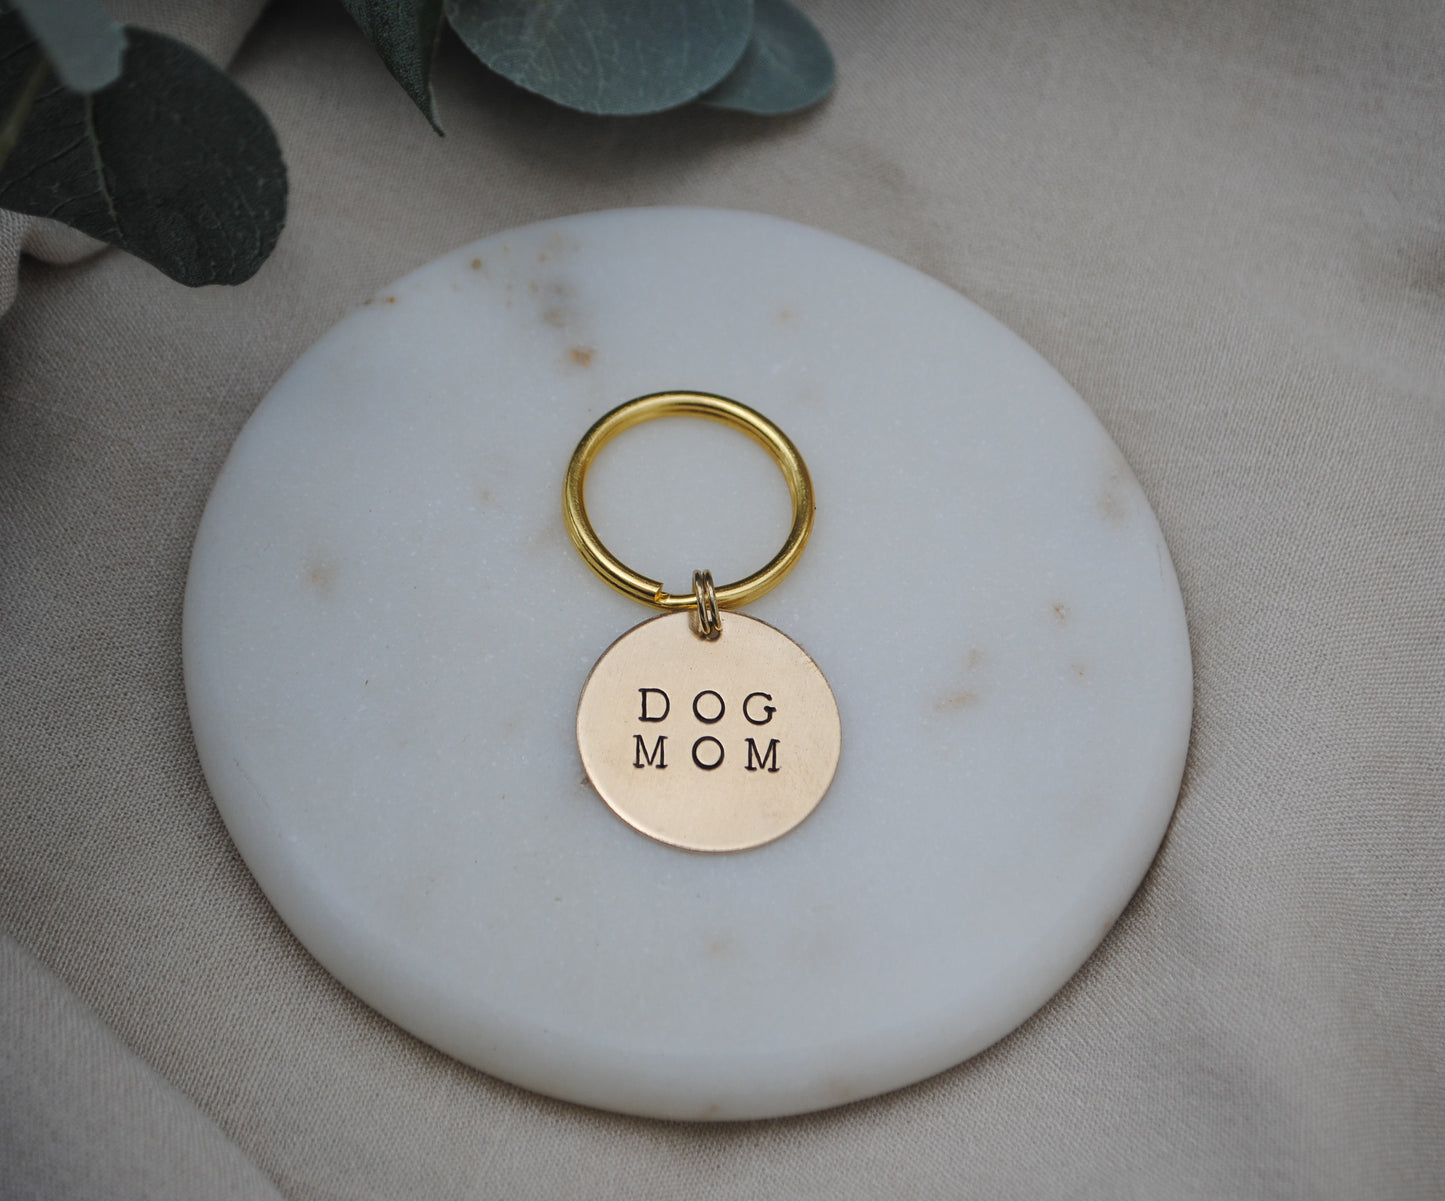 Dog Mom Keychain - Dog Mom Gift - Gift for Her - Pet Parents Gift - Fur Mom - Dog Mom Keytag - Gift for Couples - Cat Mom Gift - Unique Gift